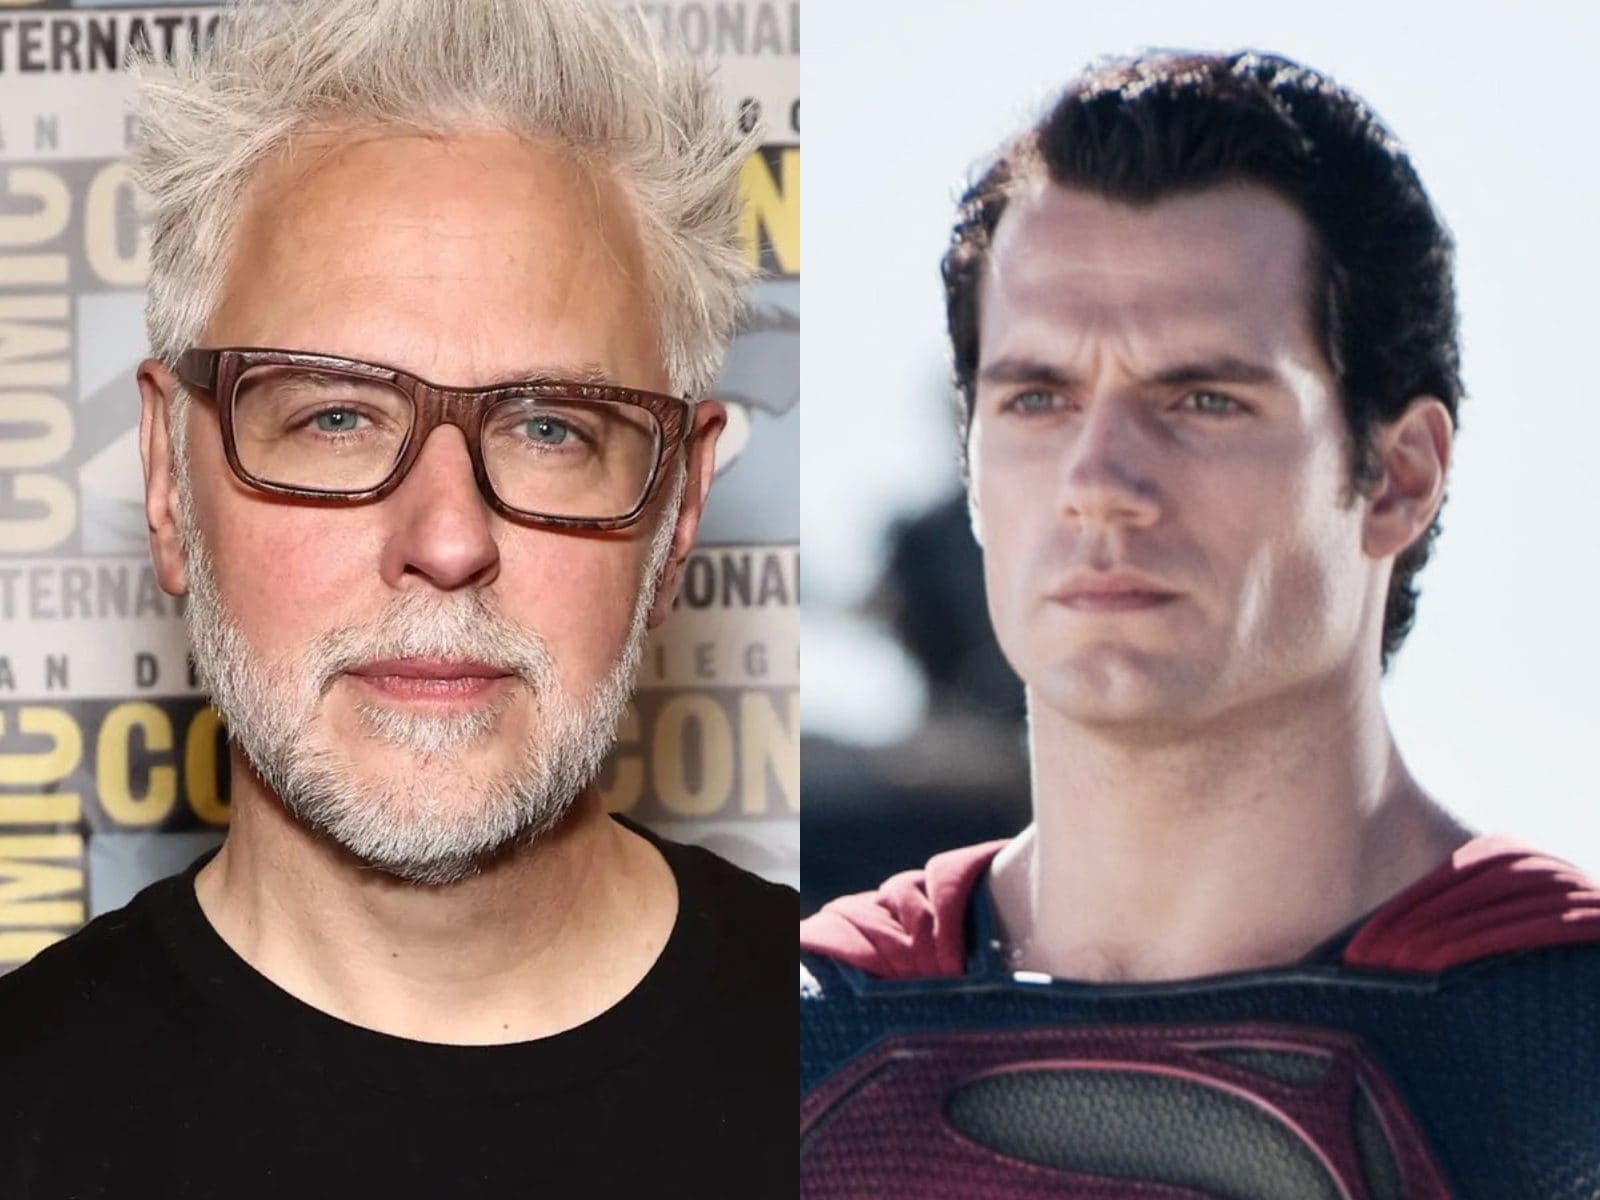 Henry Cavill says he is back as Superman in video announcement